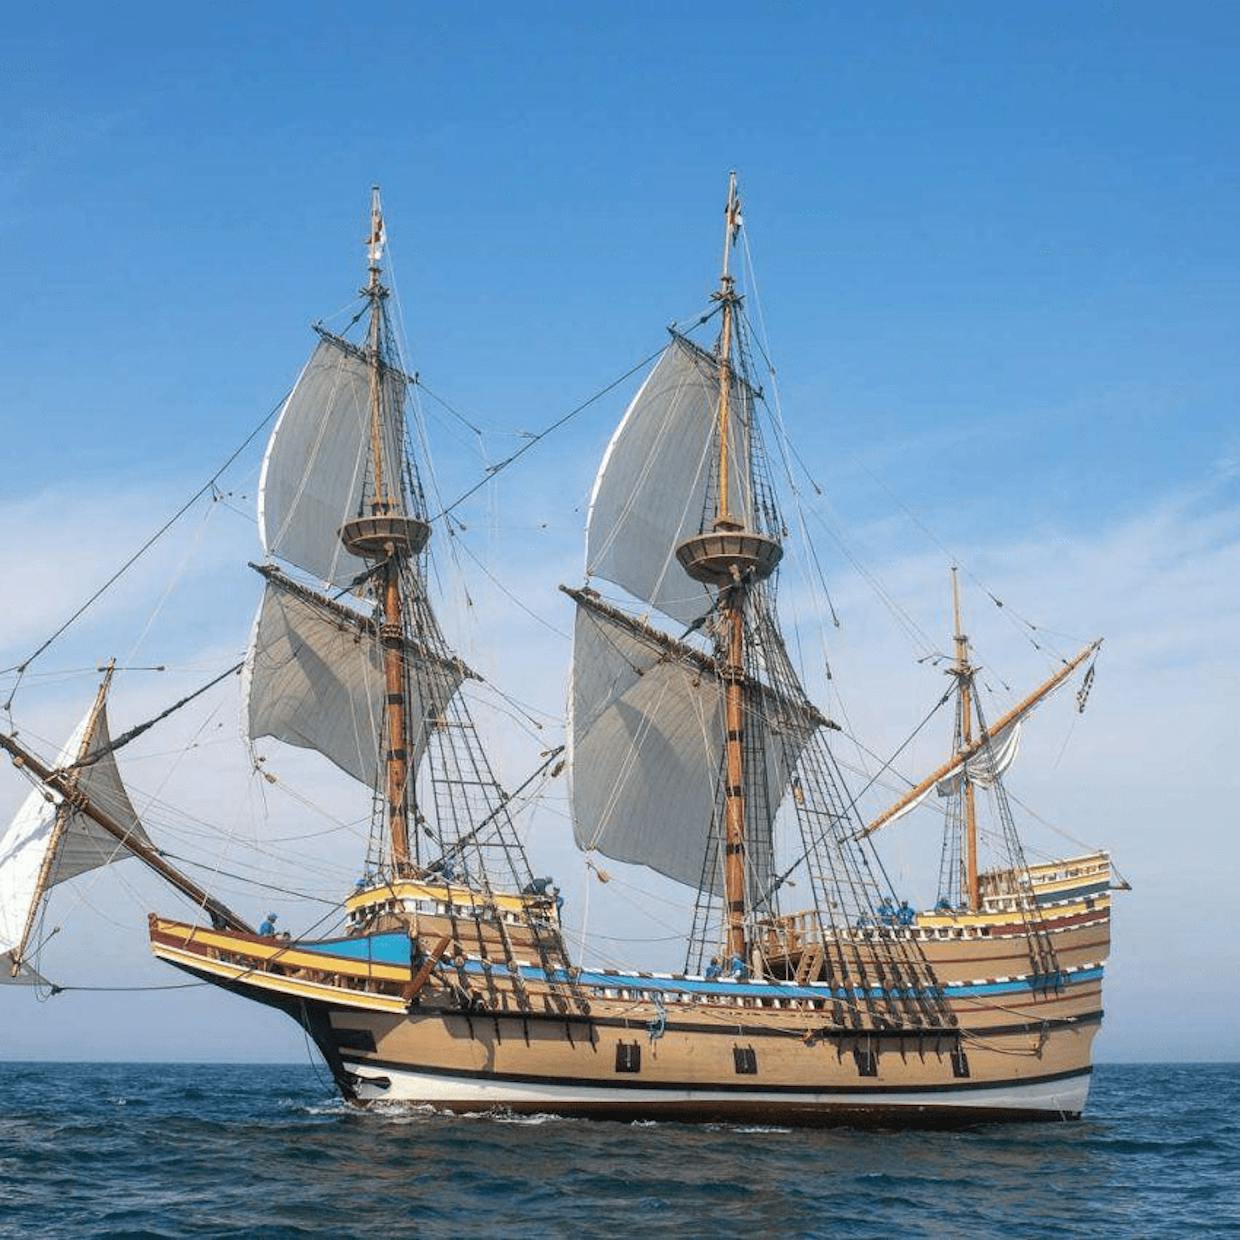 Mayflower II, a full-scale reproduction of the Mayflower, was built in 1956, and is on the National Register of Historic Places. (Plimoth Plantation)